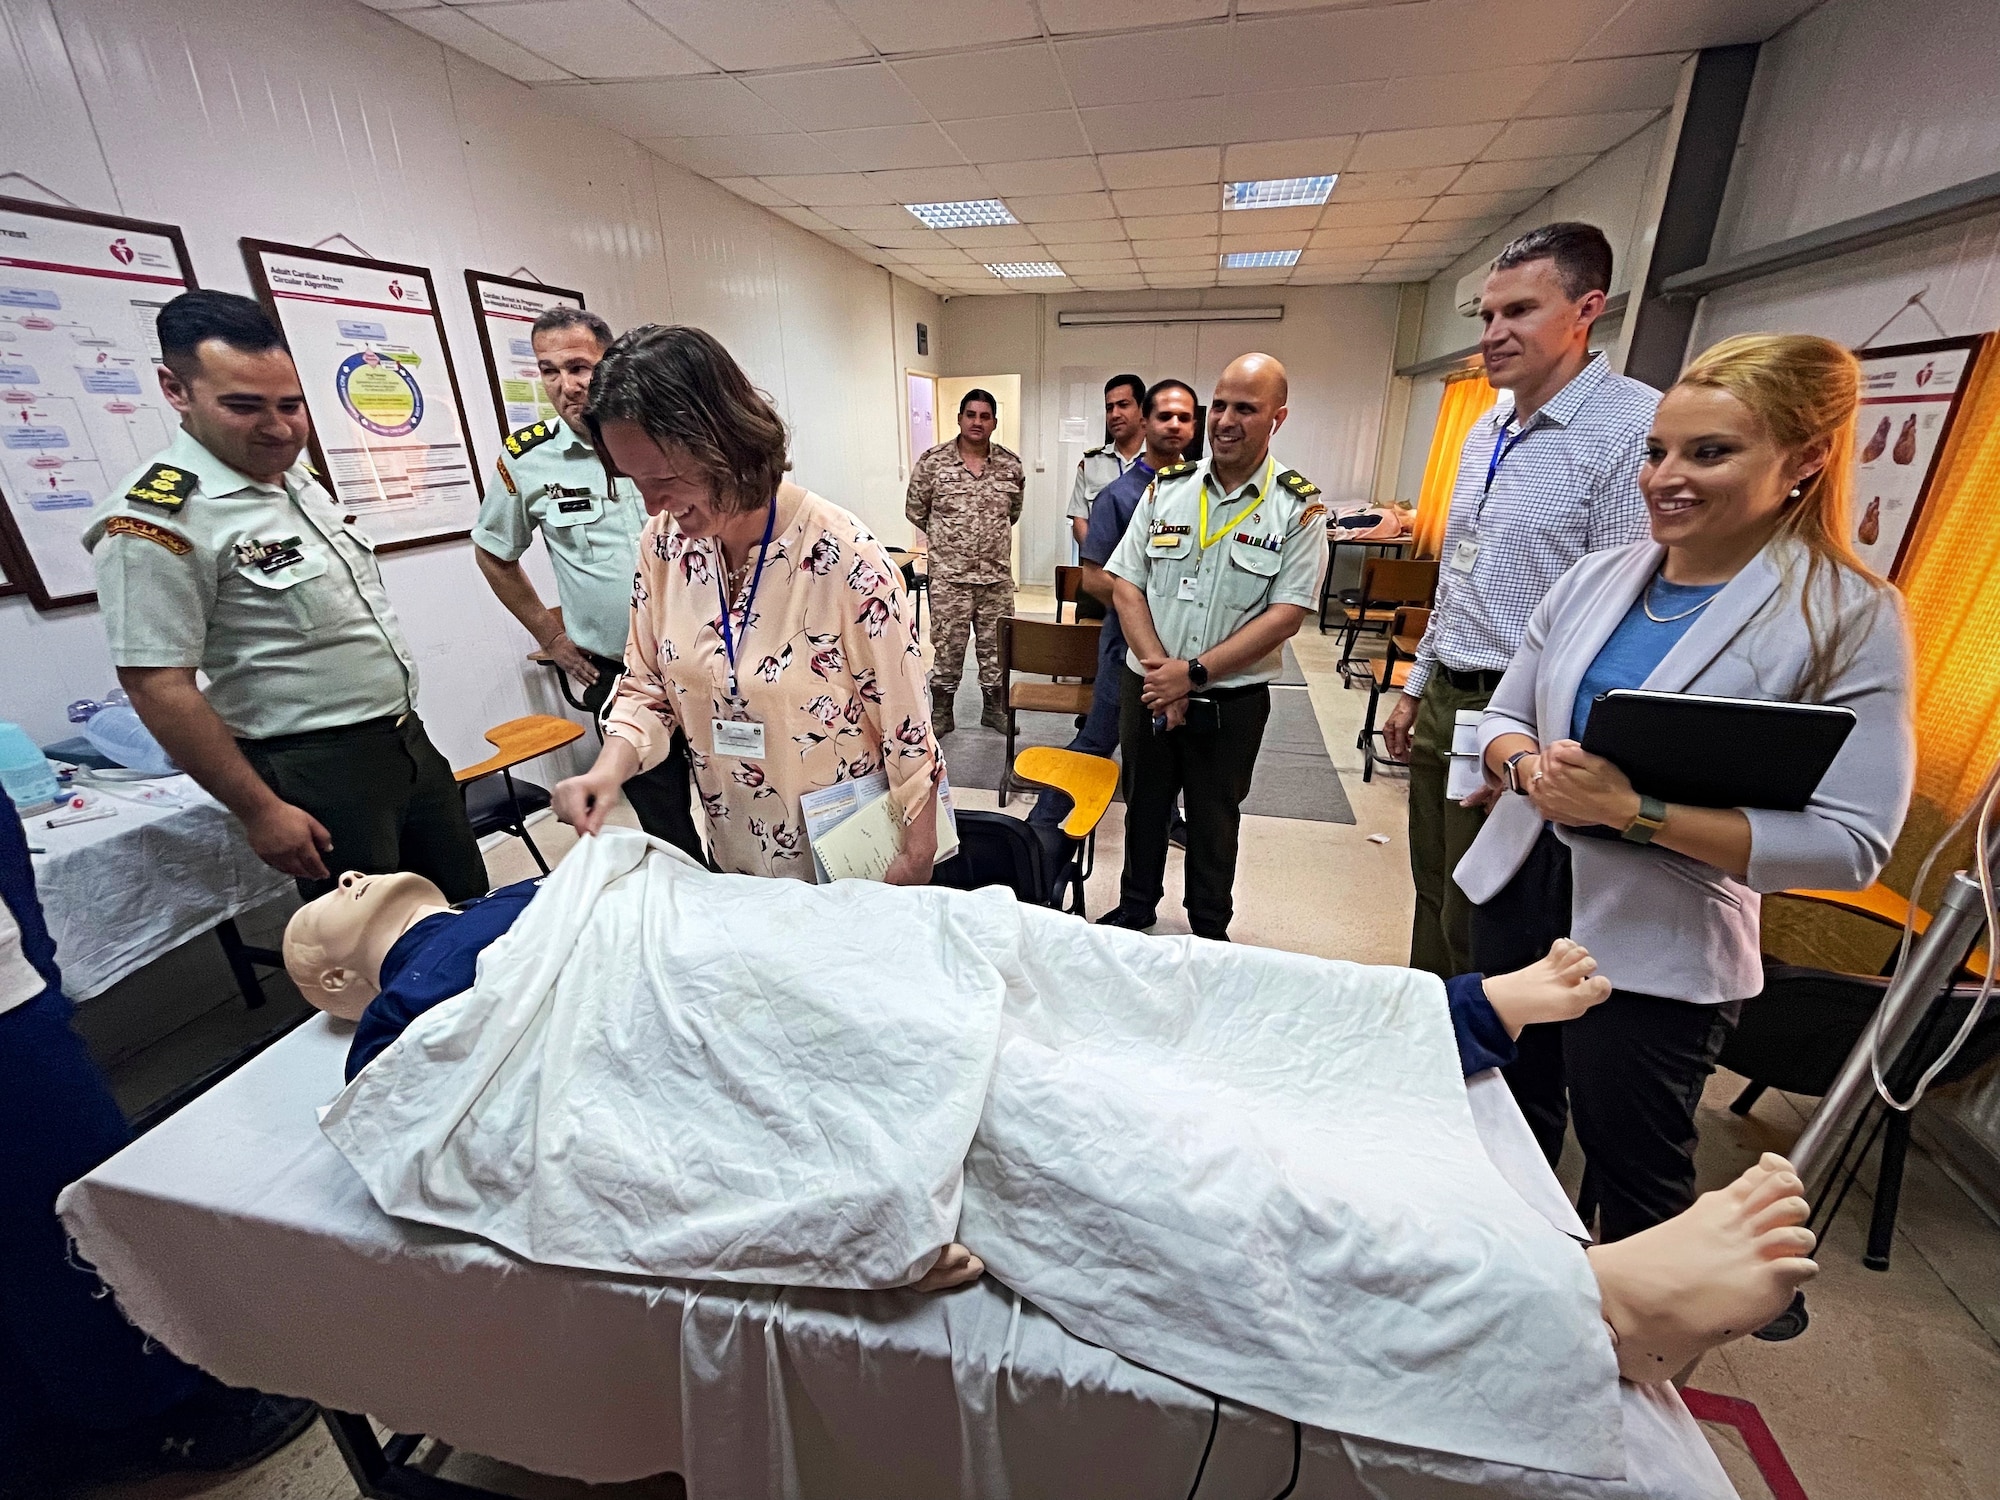 Lt. Col. Valerie Sams, Brooke Army Medical Center trauma medical director and clinical team lead for the partner nation trauma exchange, lifts a cover off of a medical practice dummy May 11, 2022 in Amman, Jordan.